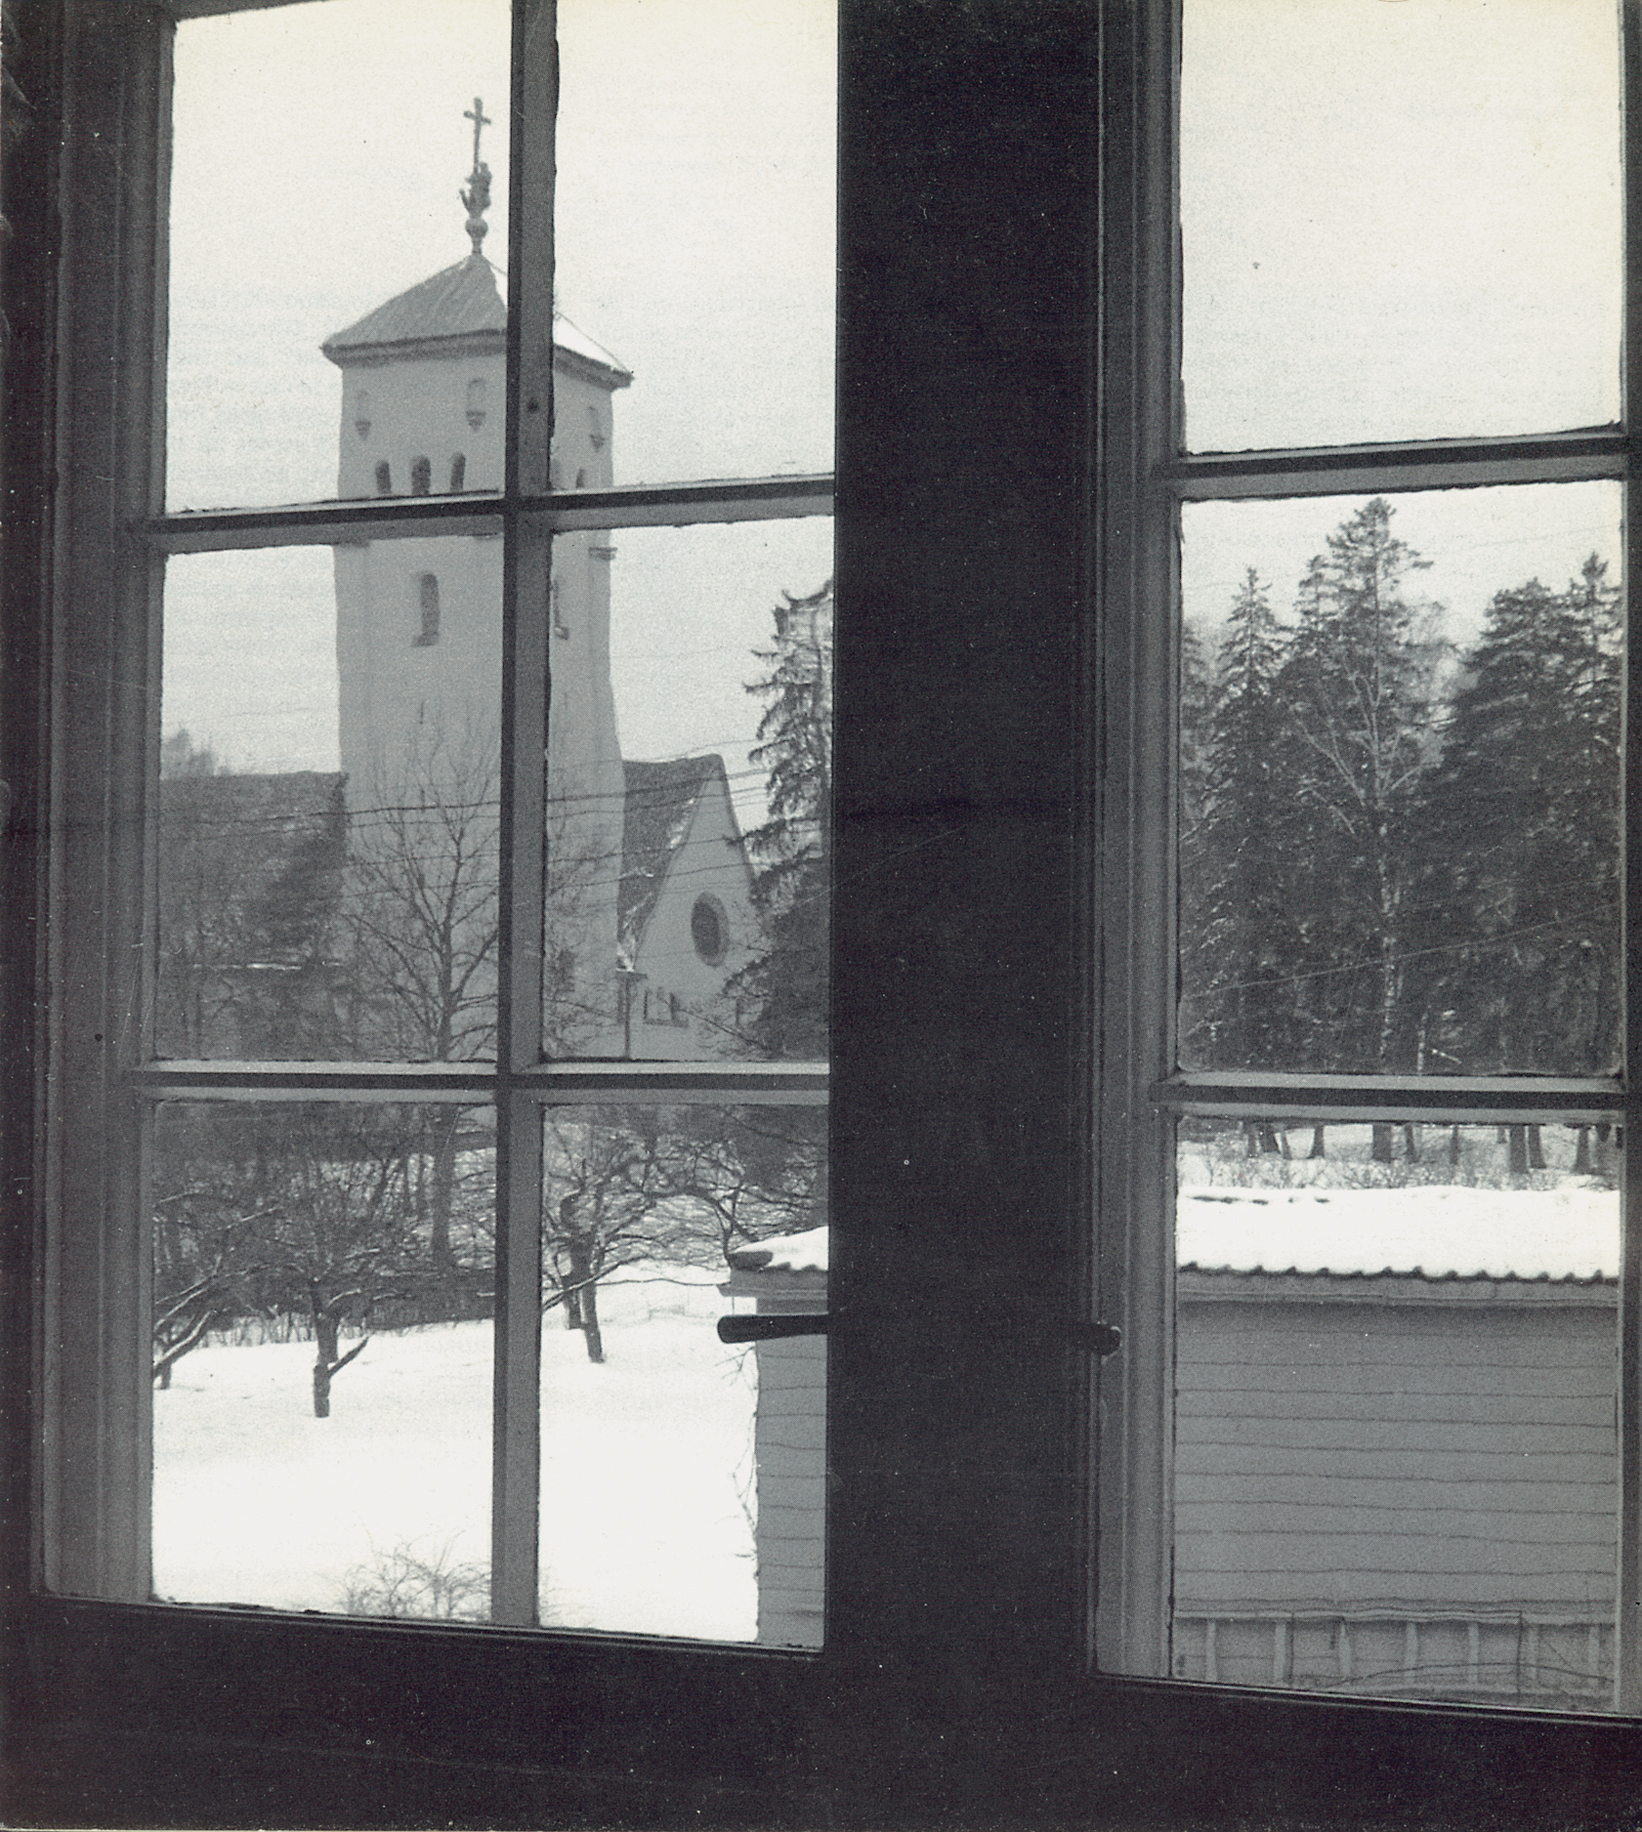 Norberg-Schulz’s picture of his second home in Slemdalsvingen 55, as published in _Genius Loci_.